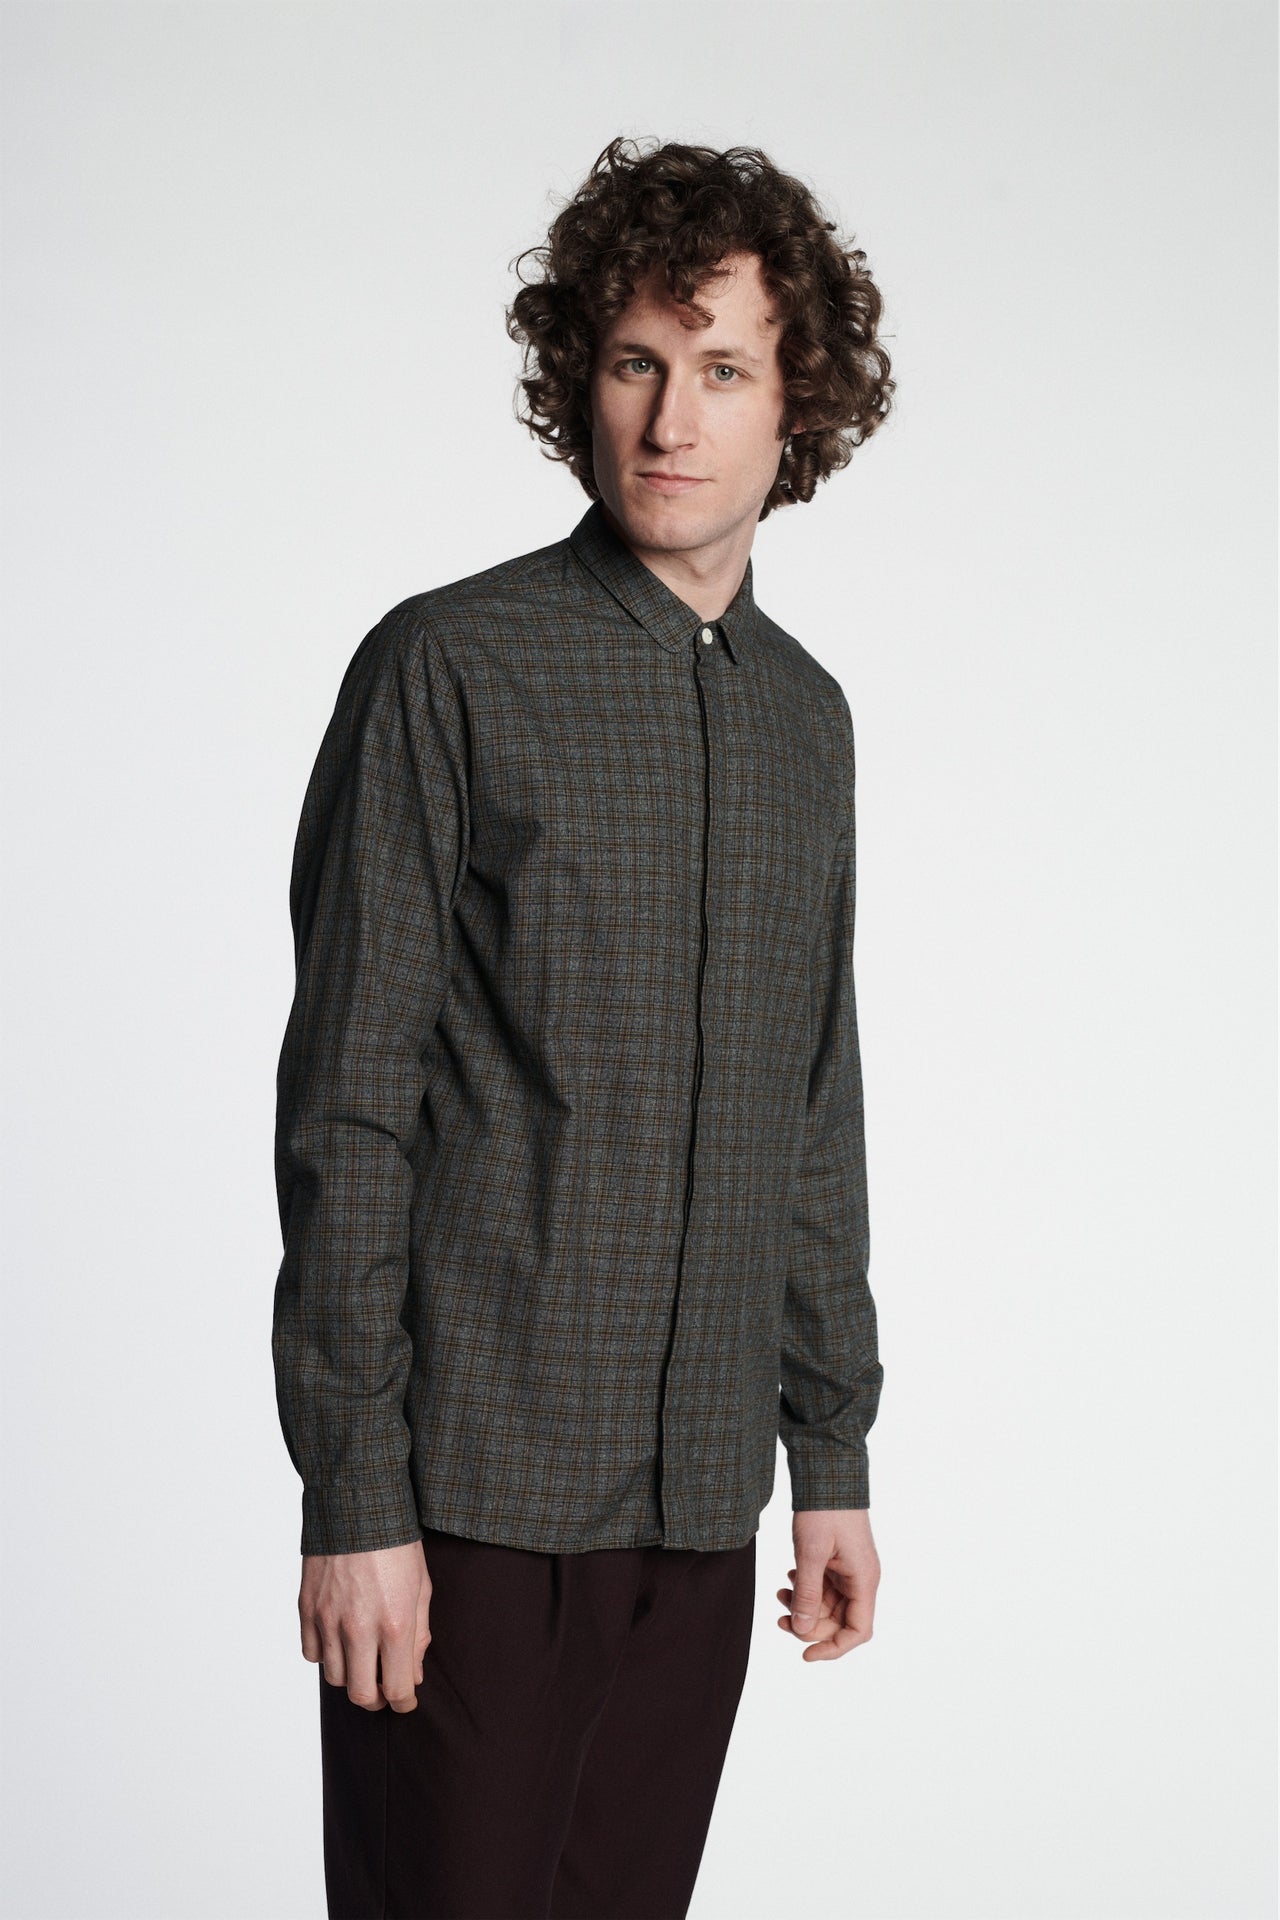 Cute Shirt in a Fine Chequered Dark Grey and Moss Green Double Twisted Italian Cotton